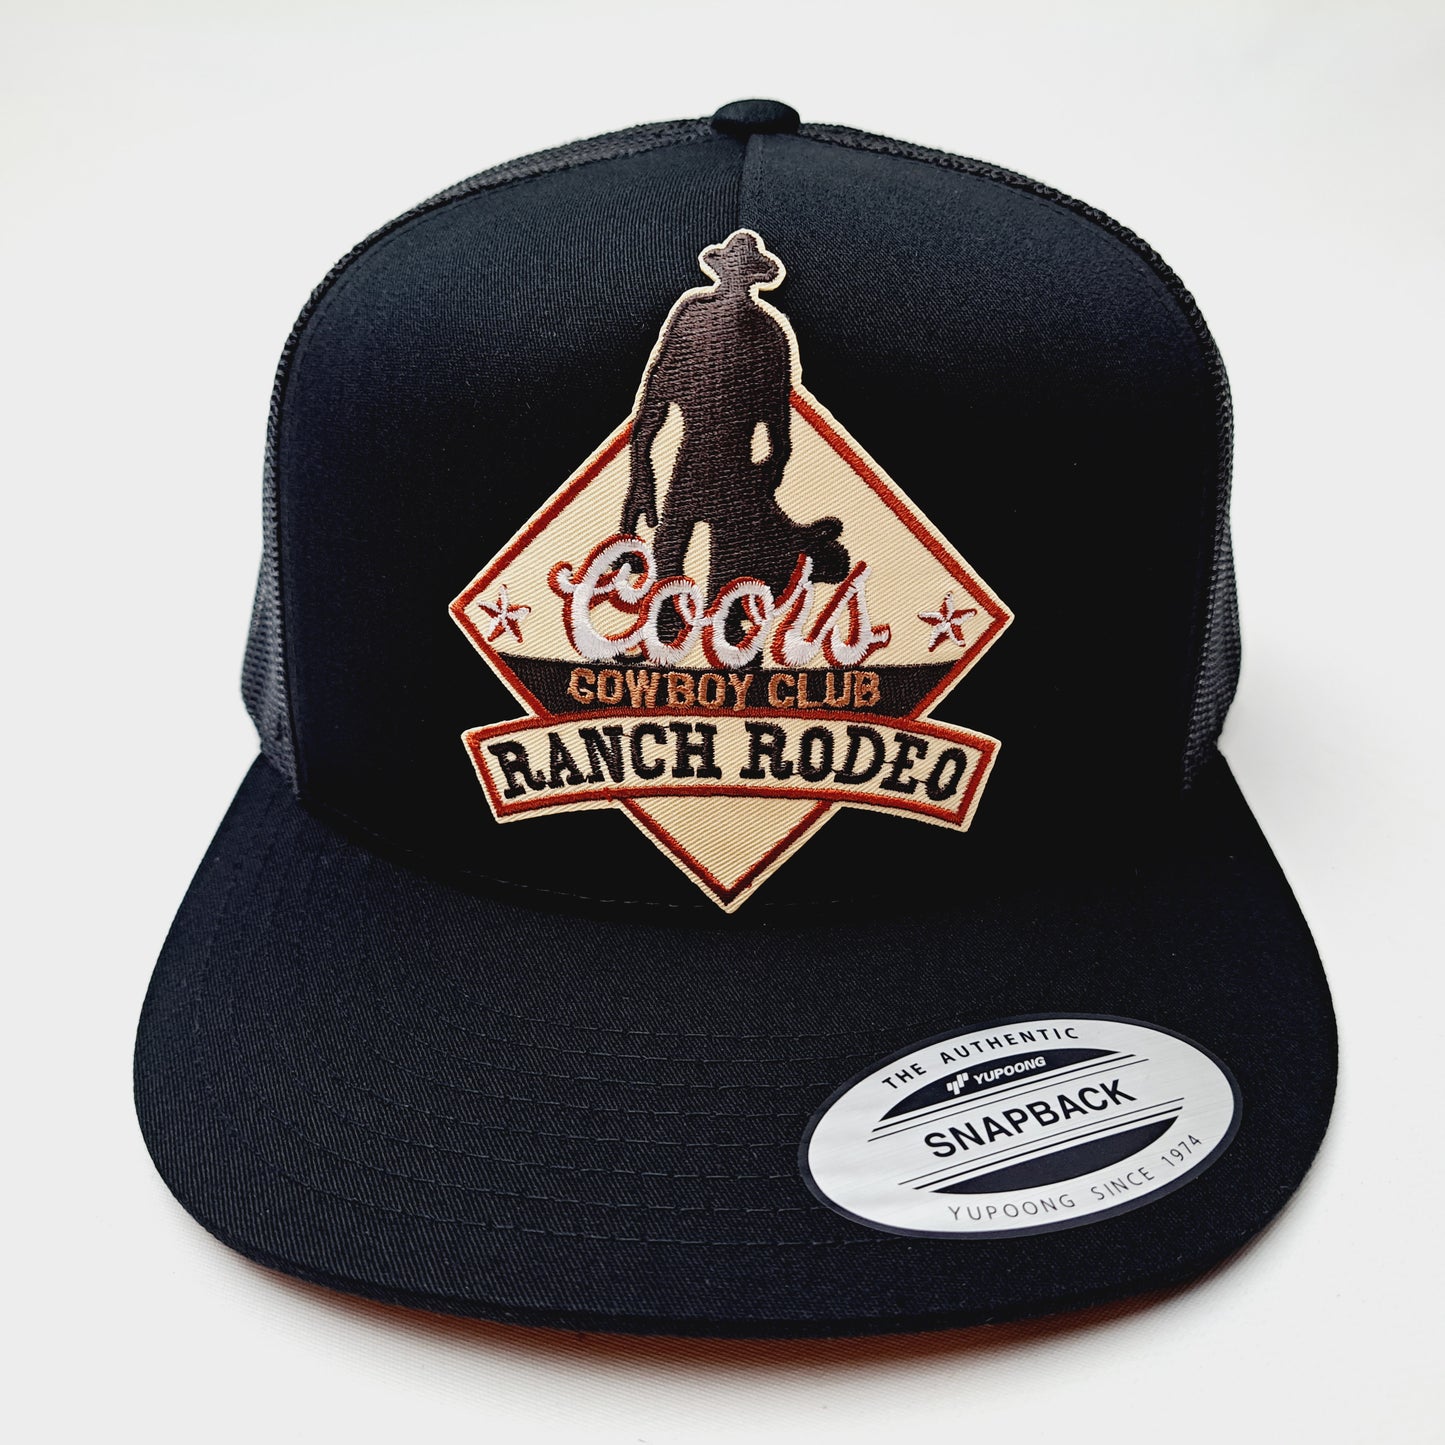 Coors Ranch Rodeo Patch Embroidered Vintage Patch Trucker Mesh Snapback Cap Hat Black